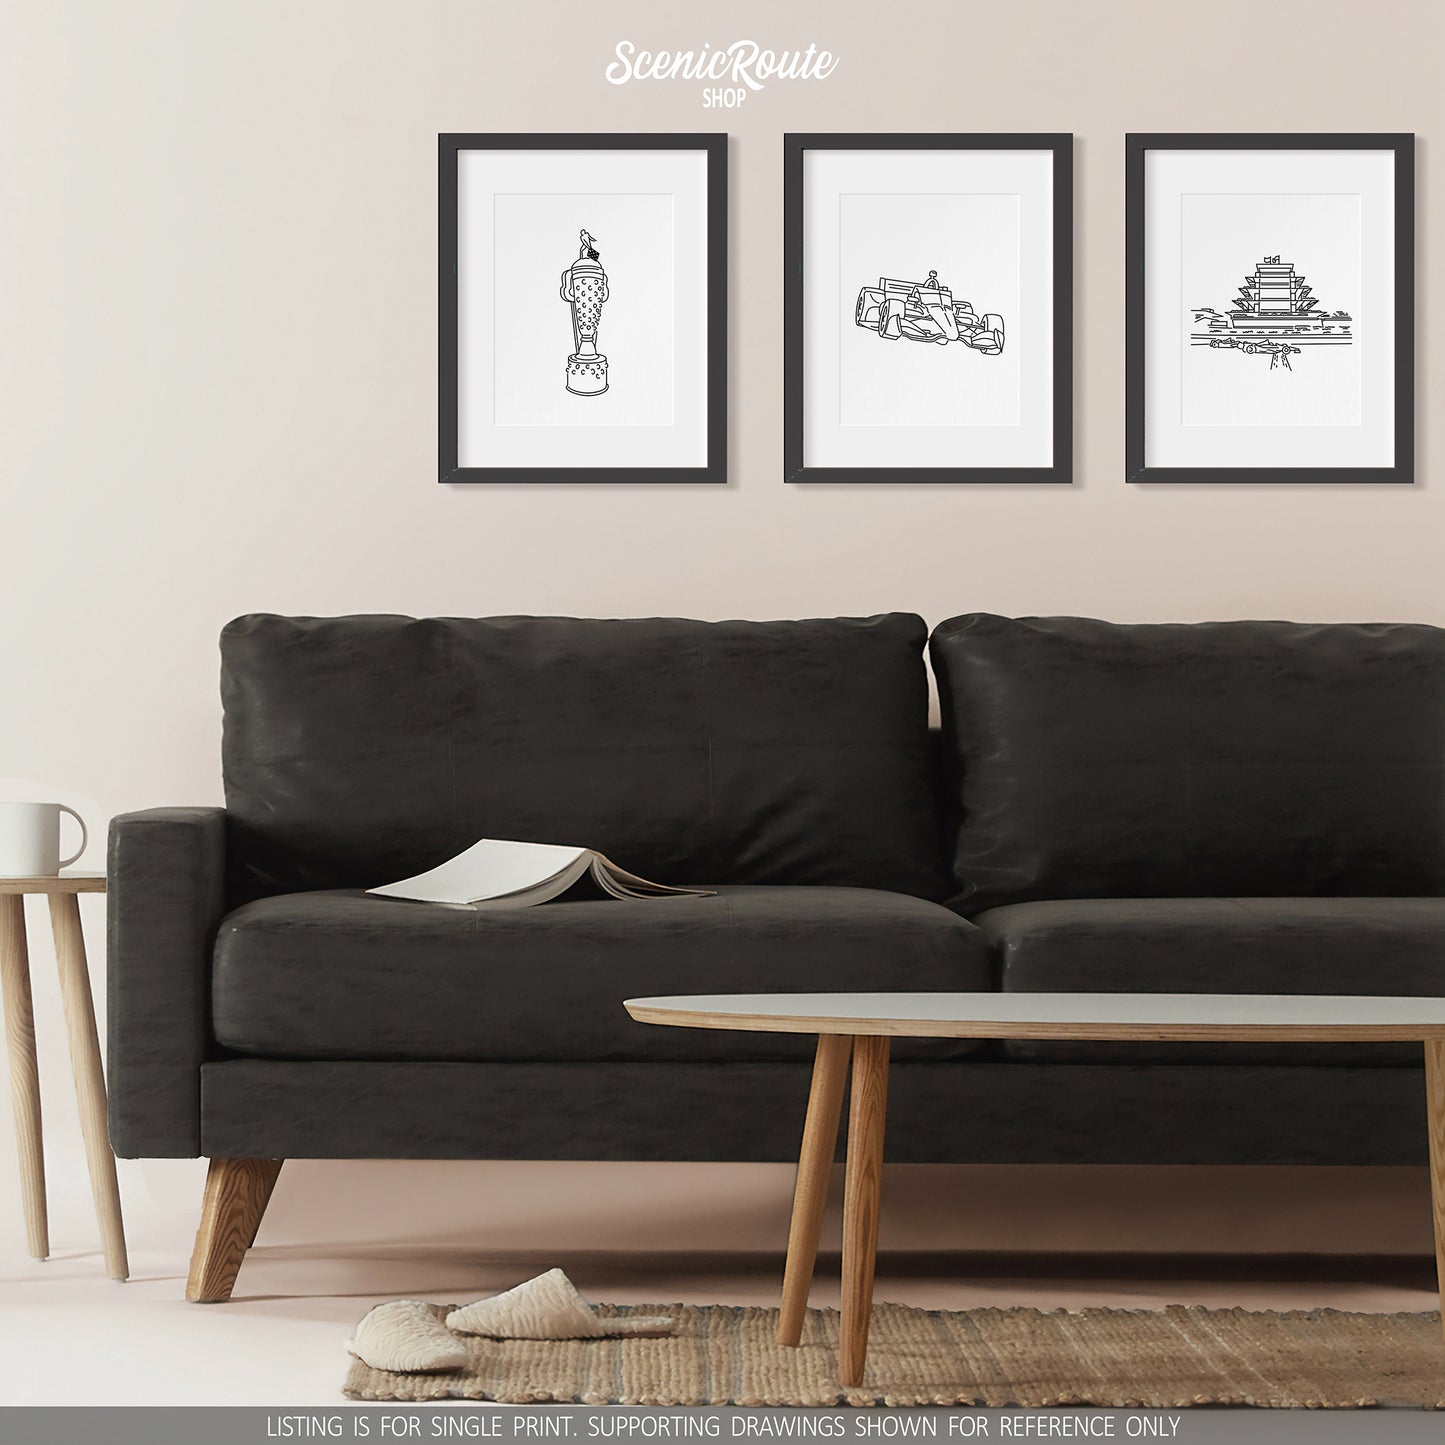 A group of three framed drawings on a wall above a couch. The line art drawings include the Indy Car Trophy, an Indy Car, and the Speedway Pagoda